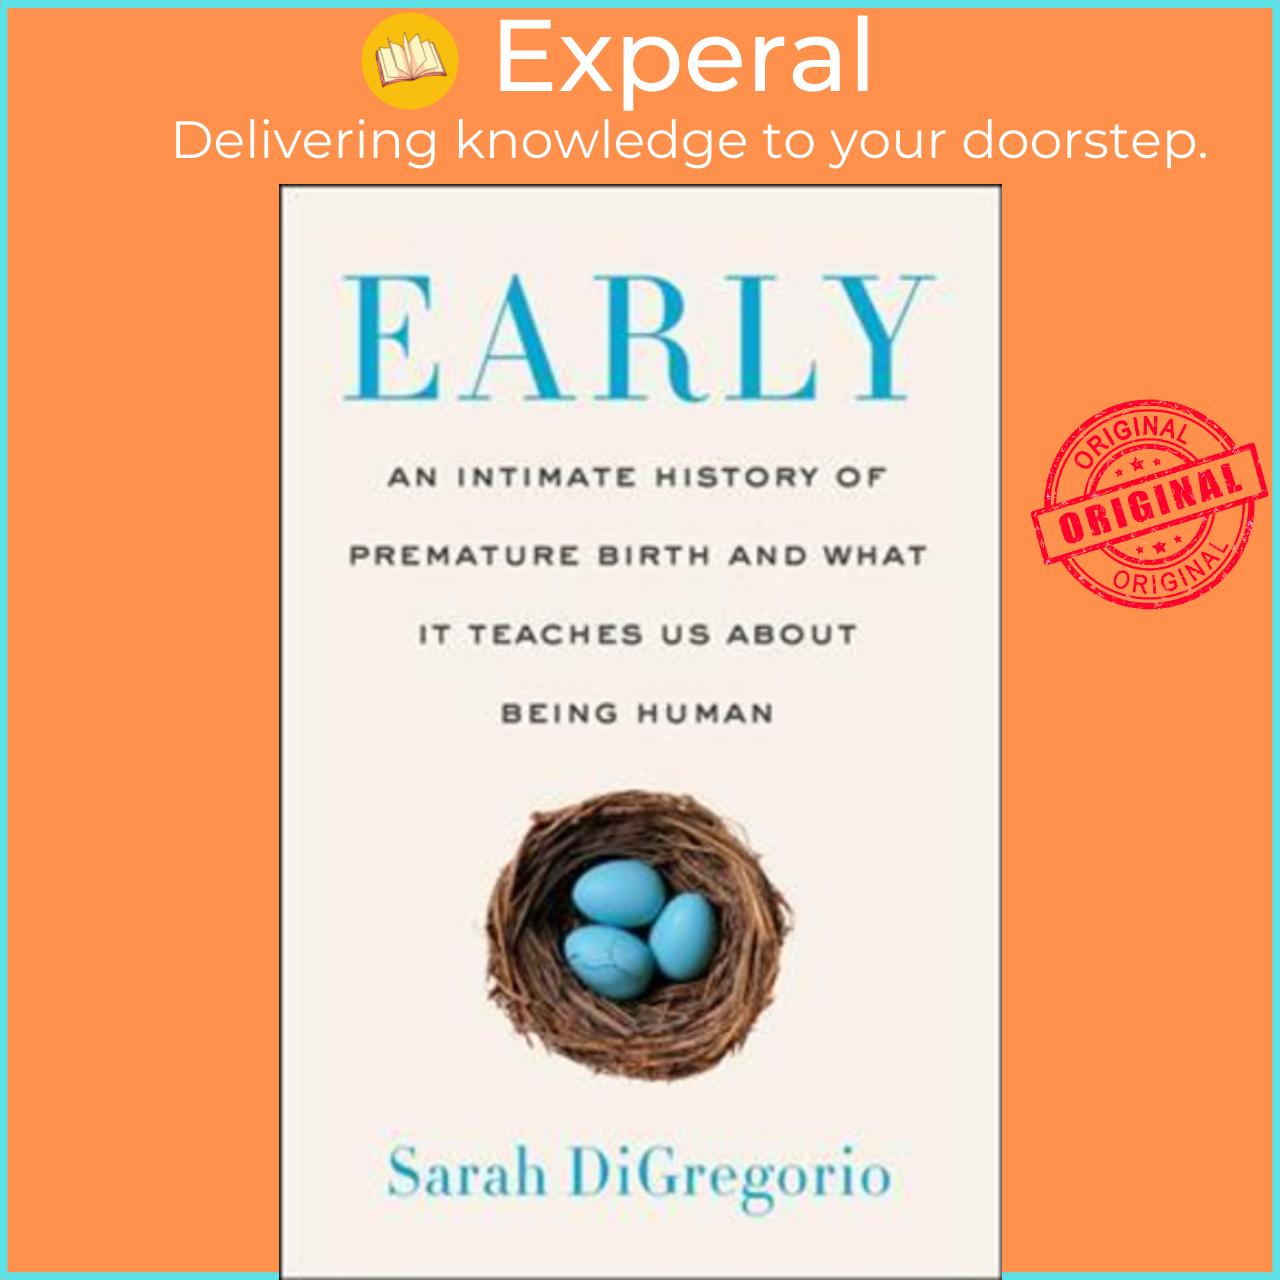 Sách - Early by Sarah DiGregorio (US edition, hardcover)